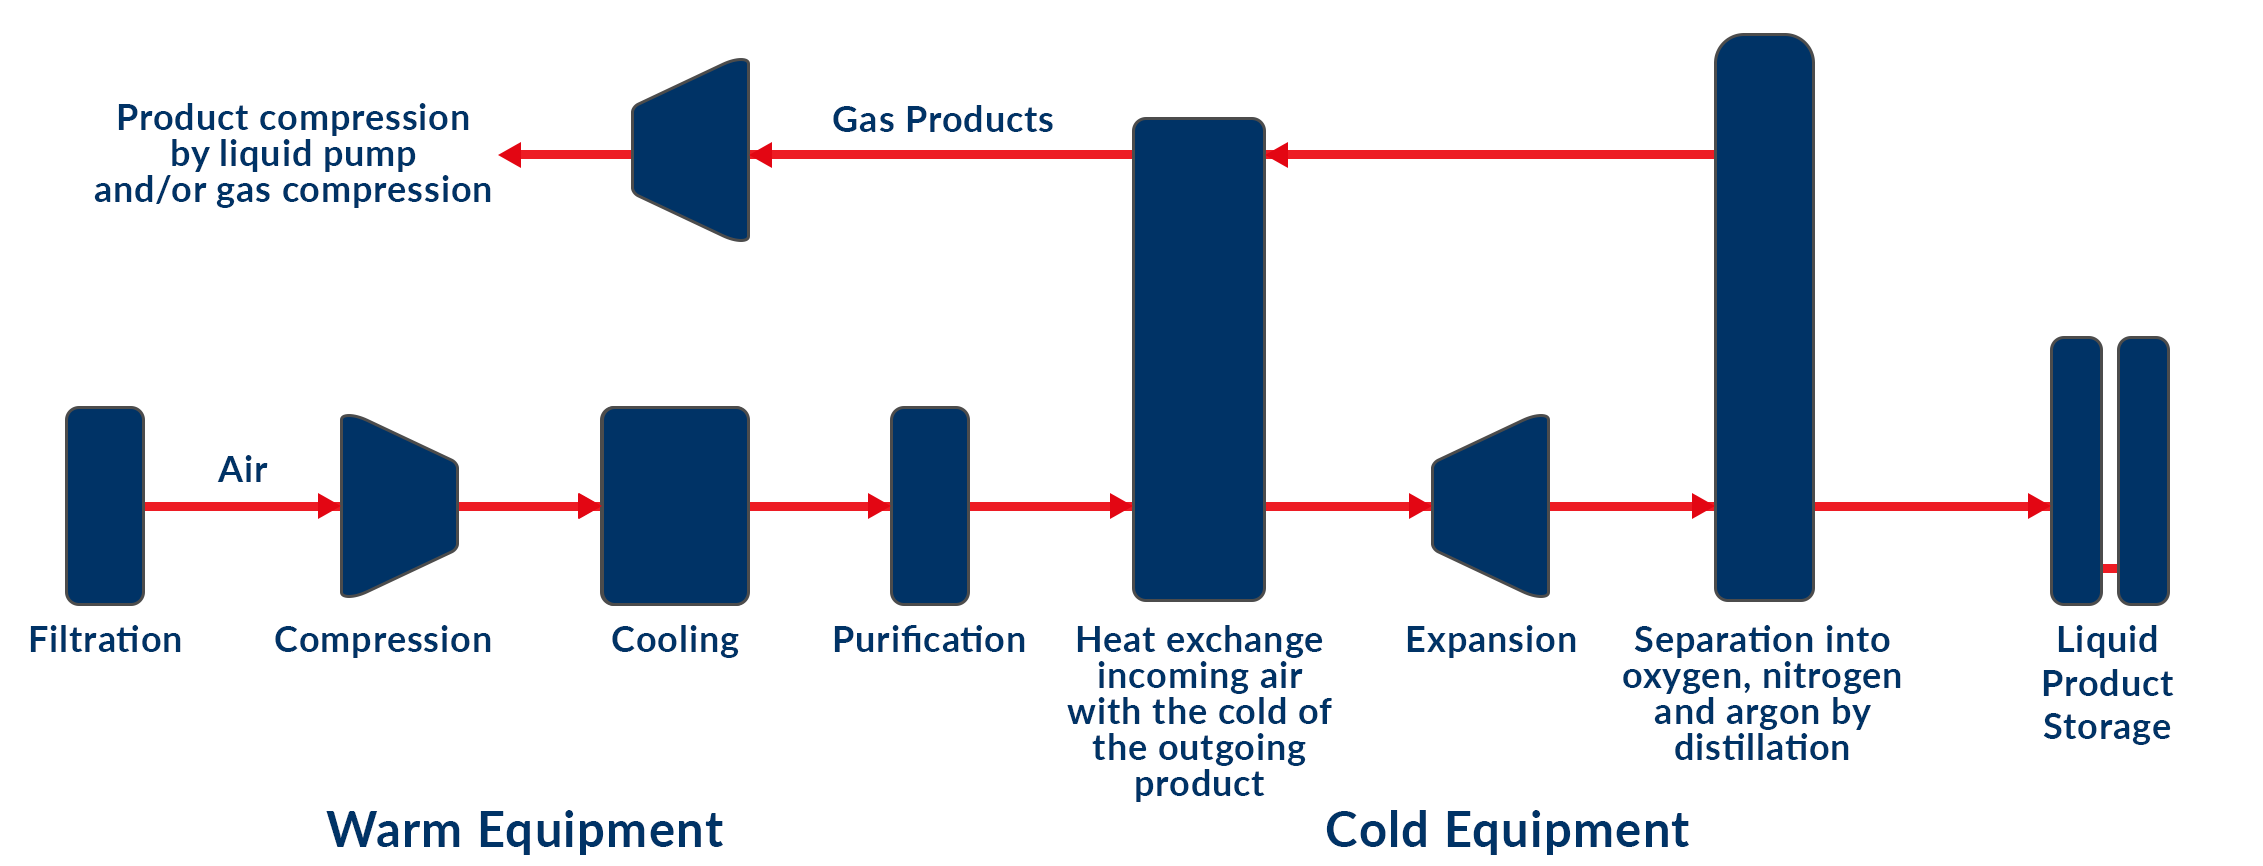 An Insight into The Gas Generation Industry